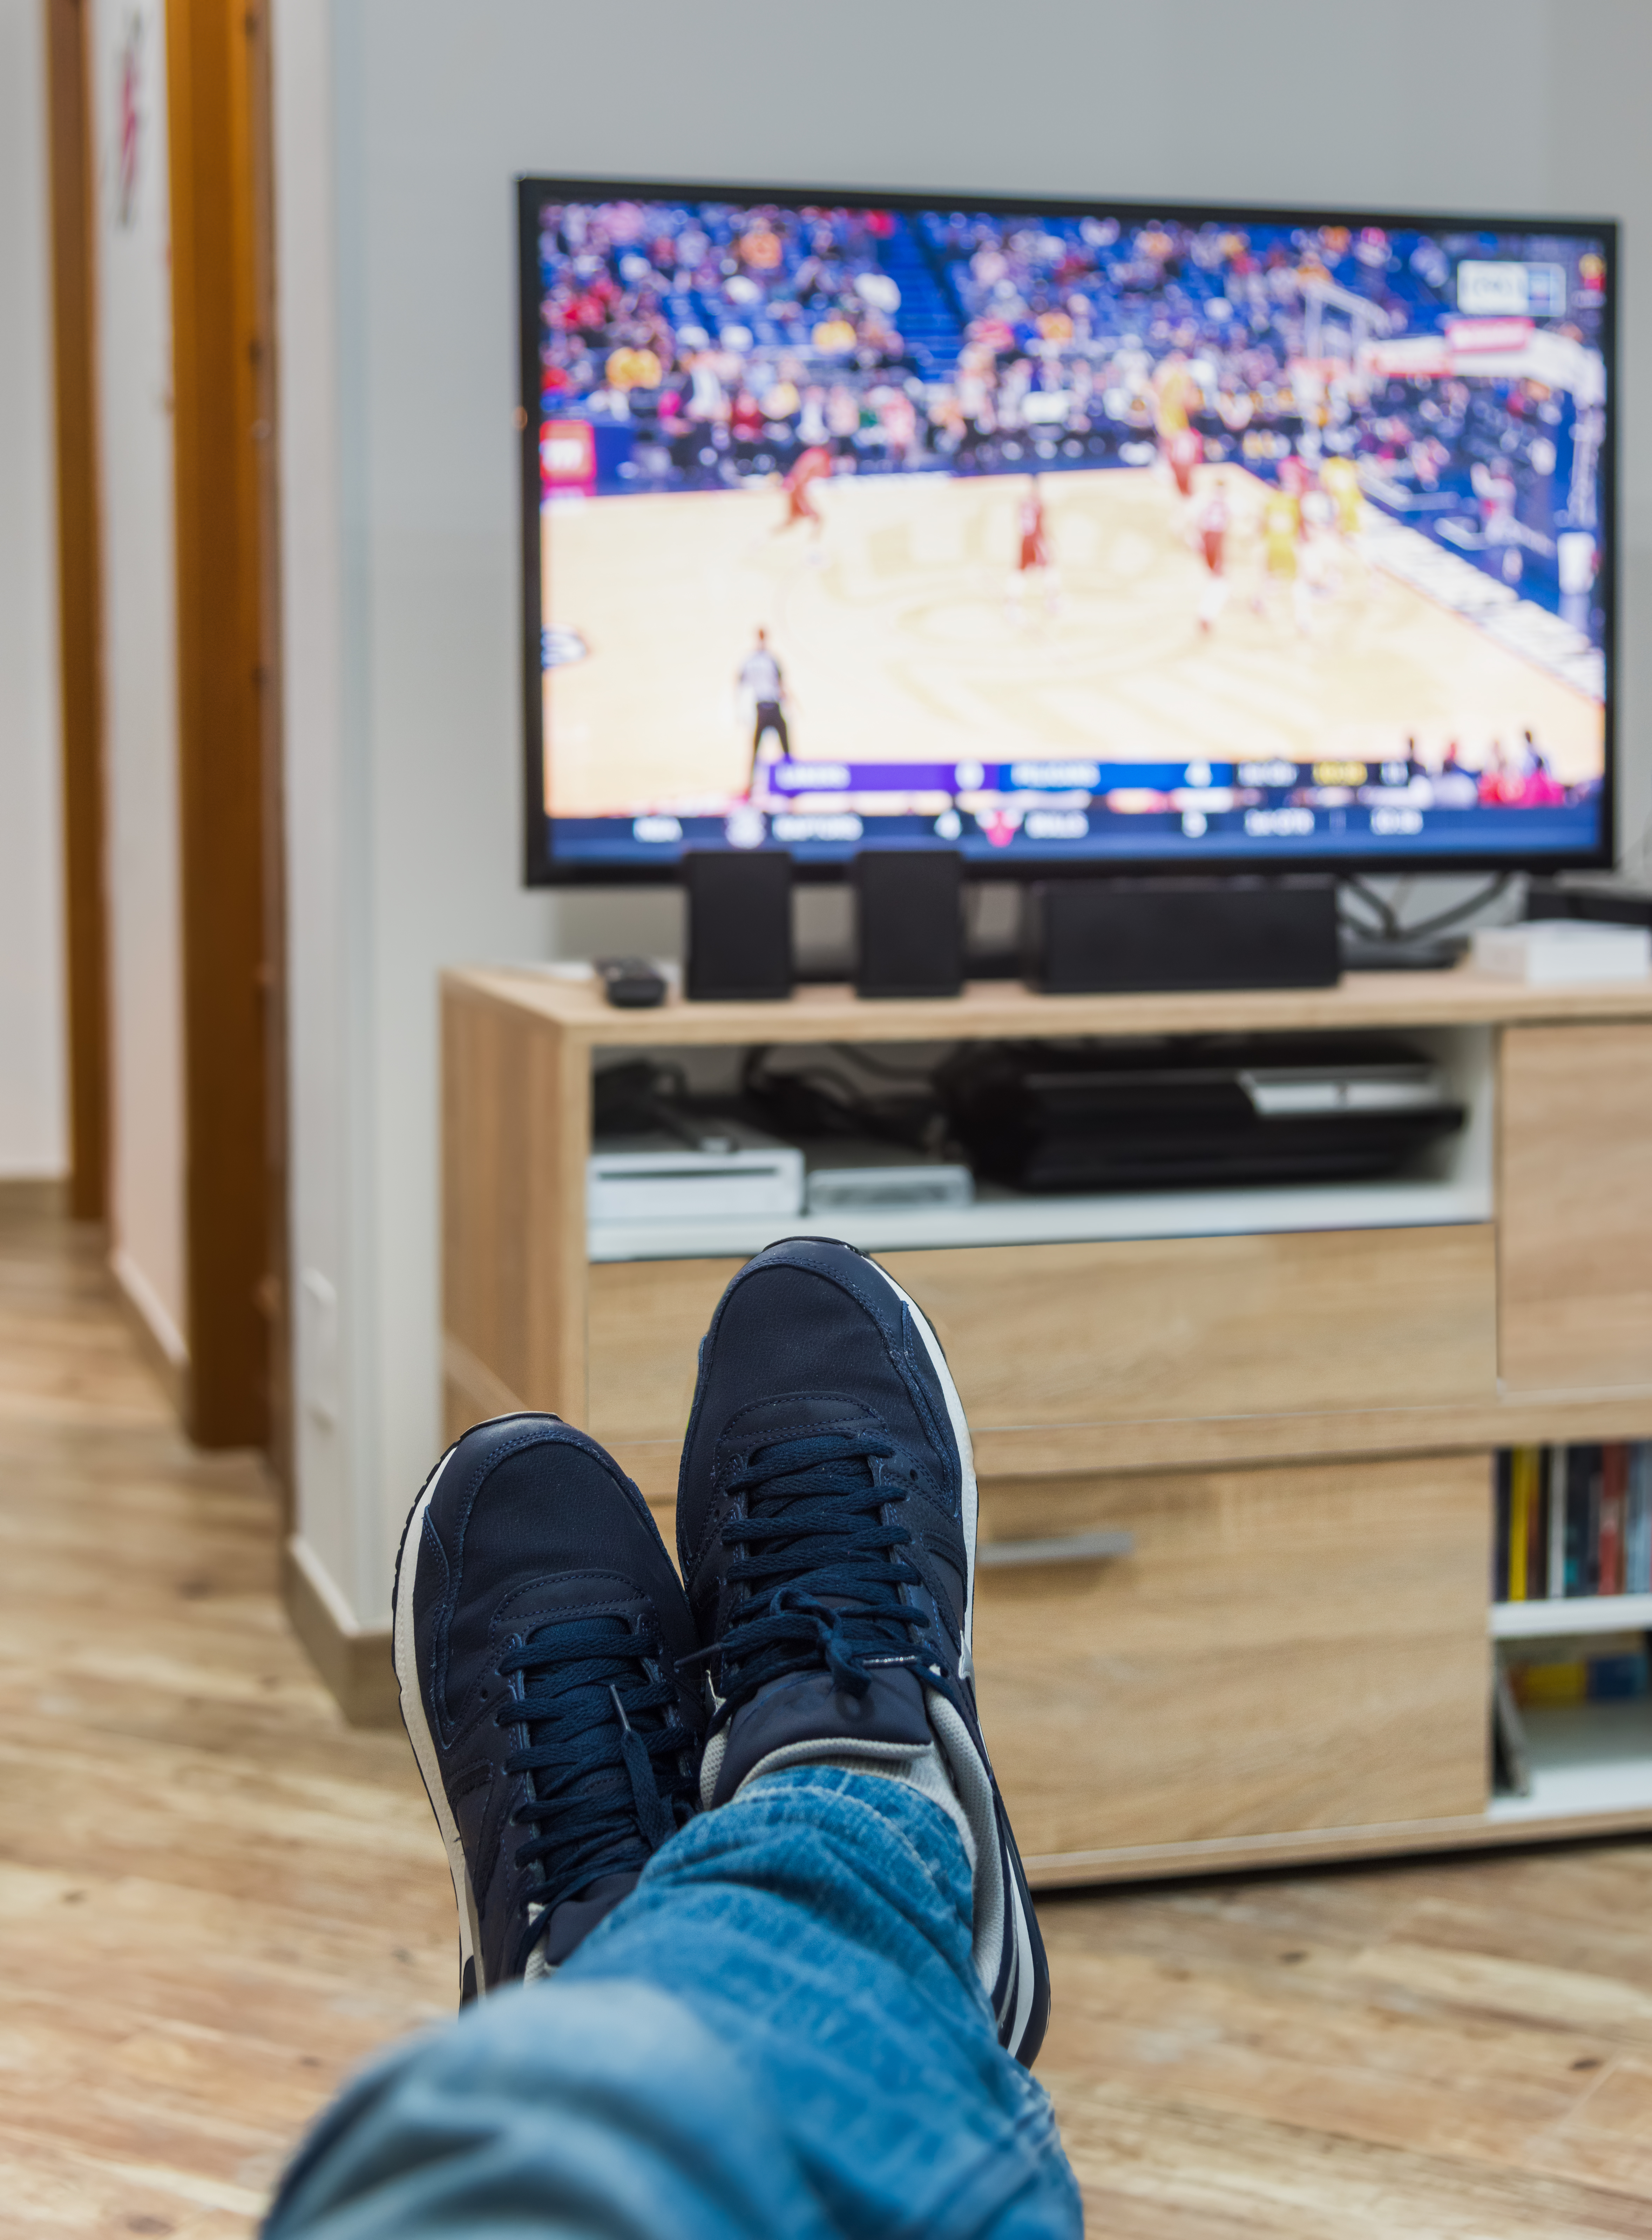 First person view of a man watching a basketball game on tv. | Source: Shutterstock